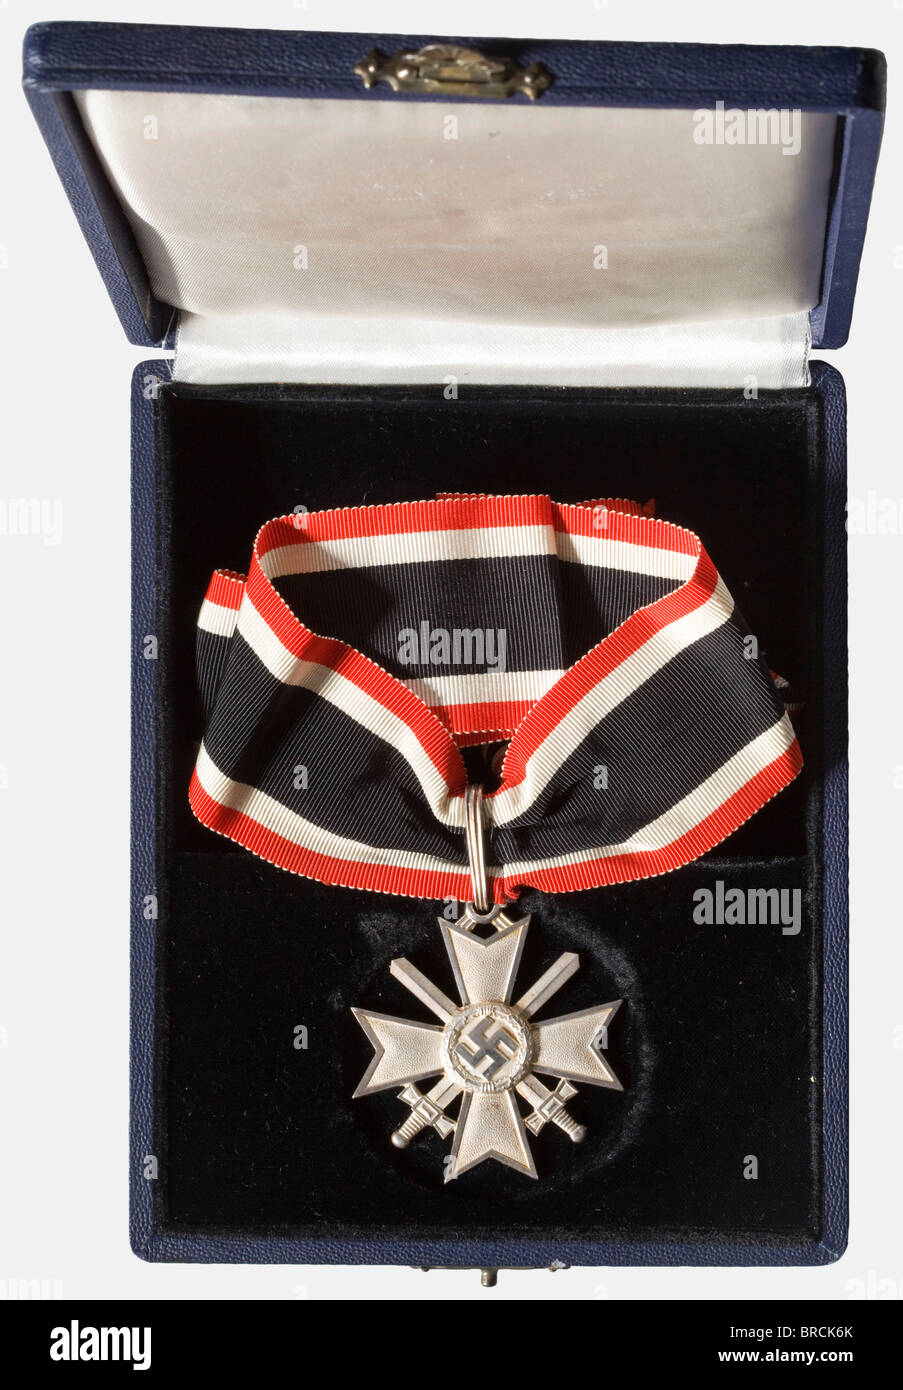 A Knight's Cross with Swords to the War Merit Cross of 1939, in its presentation case Frosted silver, the edges polished, closed, fluted suspension ring, punched '900' and '1' (for Deschler, Munich) on the lower cross arm. Unworn (Nie 7.04.03 1). Dimensions ca. 53 x 58 mm, weight 38.9 g. Sewn neck ribbon, length 49 cm. Blue award case with black velvet insert and silver coloured silk cover liner, the edges slightly rubbed. historic, historical, 1930s, 20th century, awards, award, German Reich, Third Reich, Nazi era, National Socialism, object, objects, stills, , Stock Photo